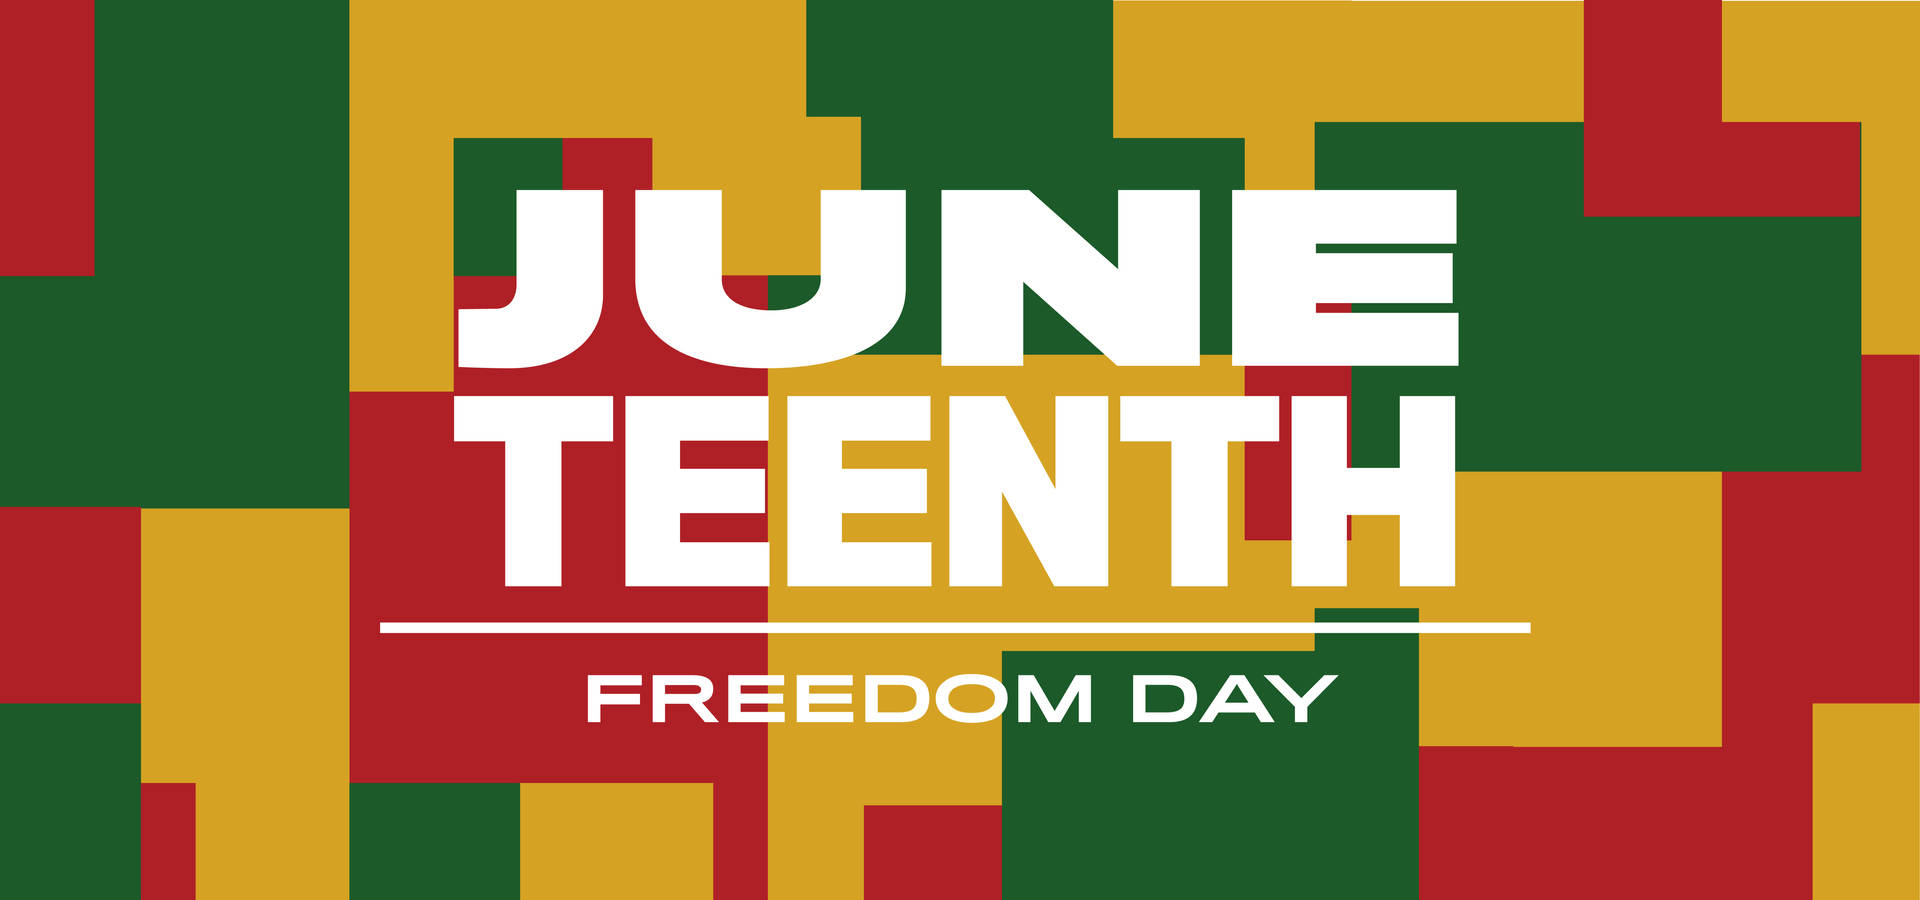 Juneteenth Freedom Day Poster Background